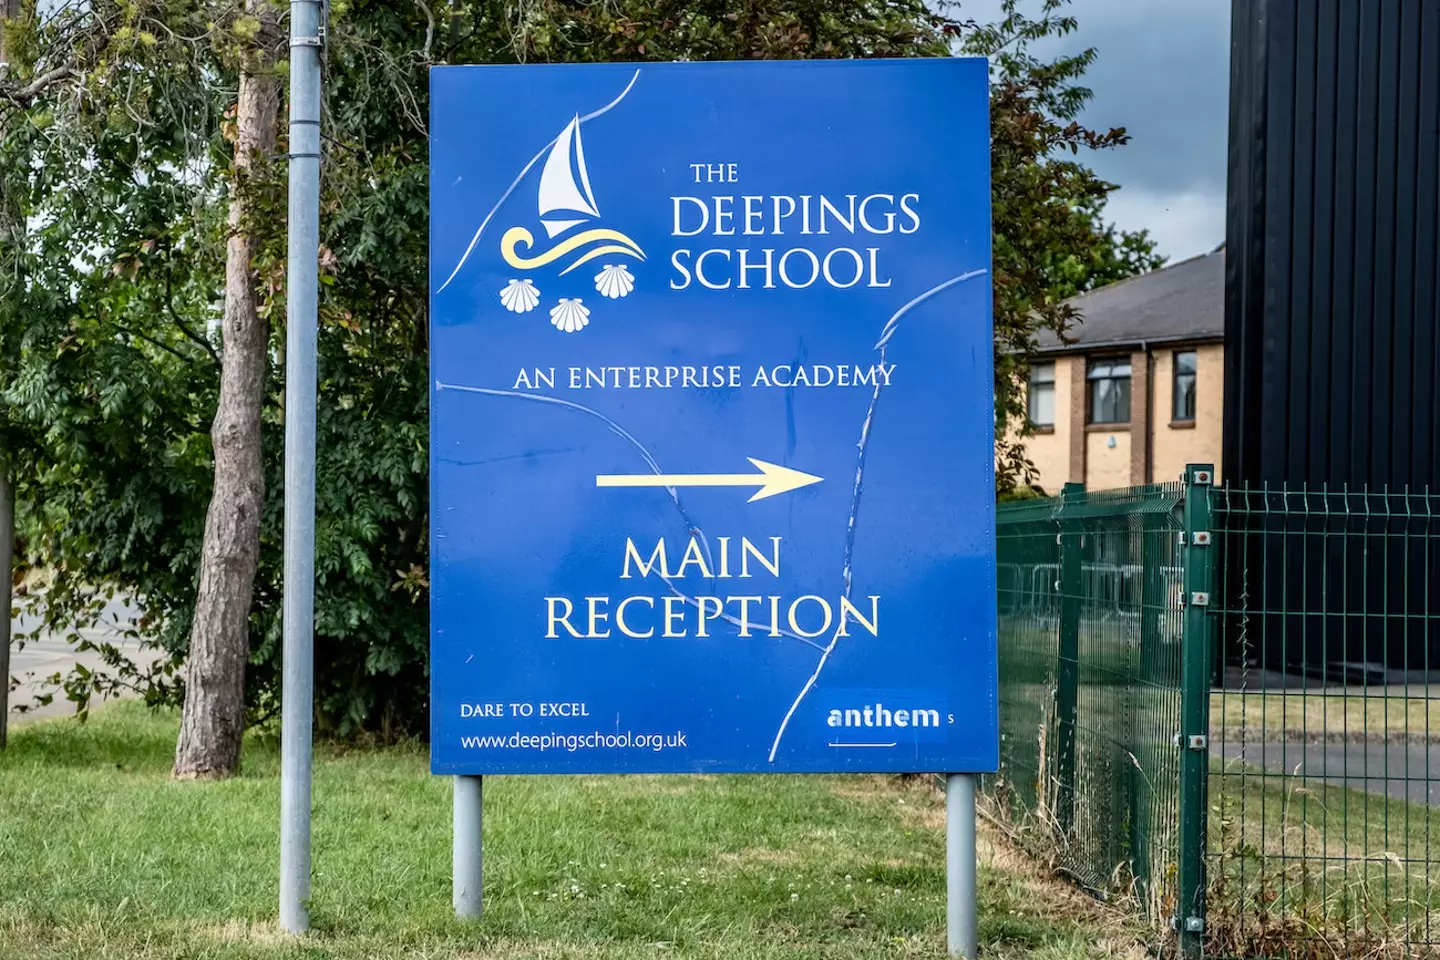 50 children at The Deepings School were put into isolation for breaking uniform regulations.